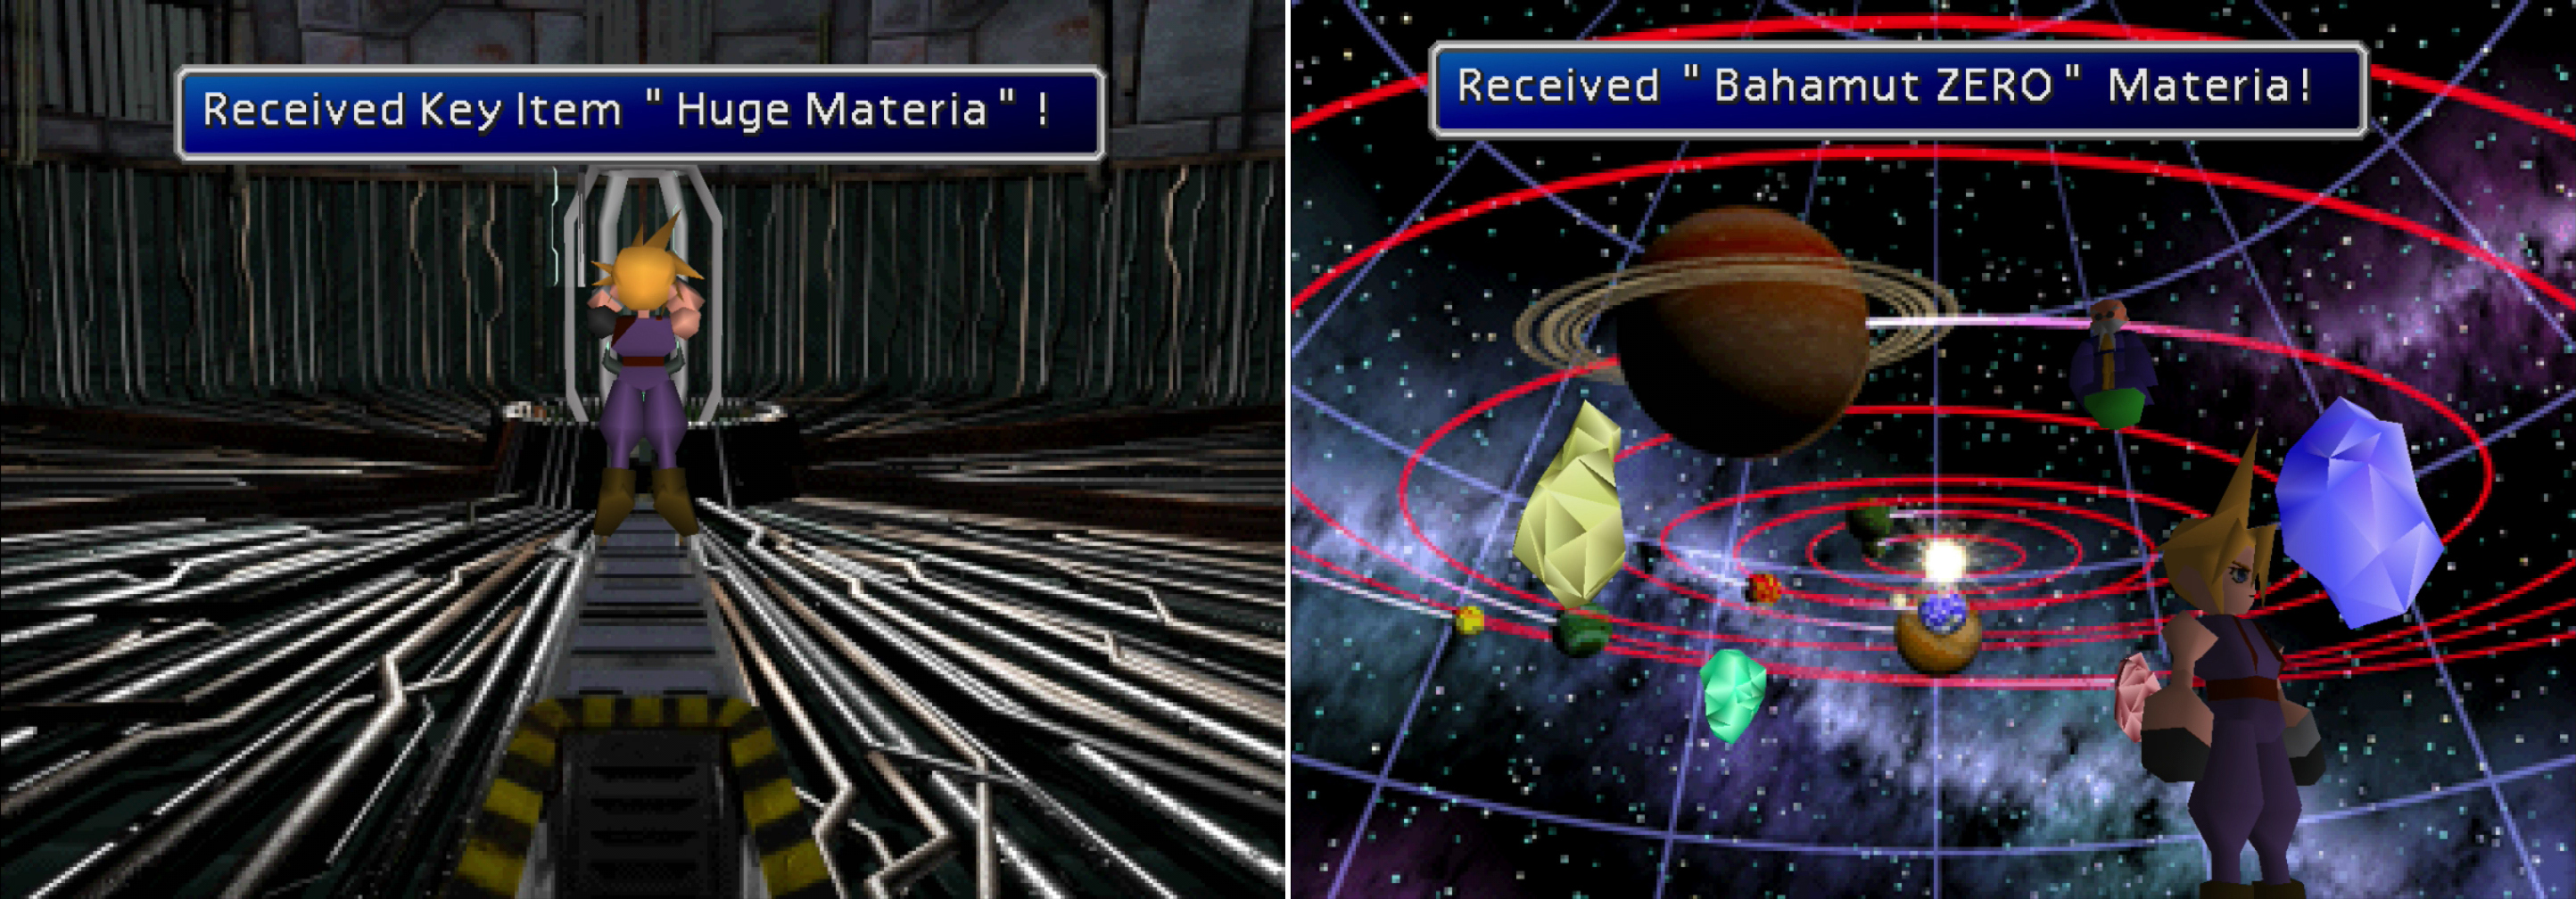 Enter the correct keycode to recover the Huge Materia (left). If you have all four Huge Materia you can interact with the blue piece to obtain the Bahamut ZERO Materia (right).